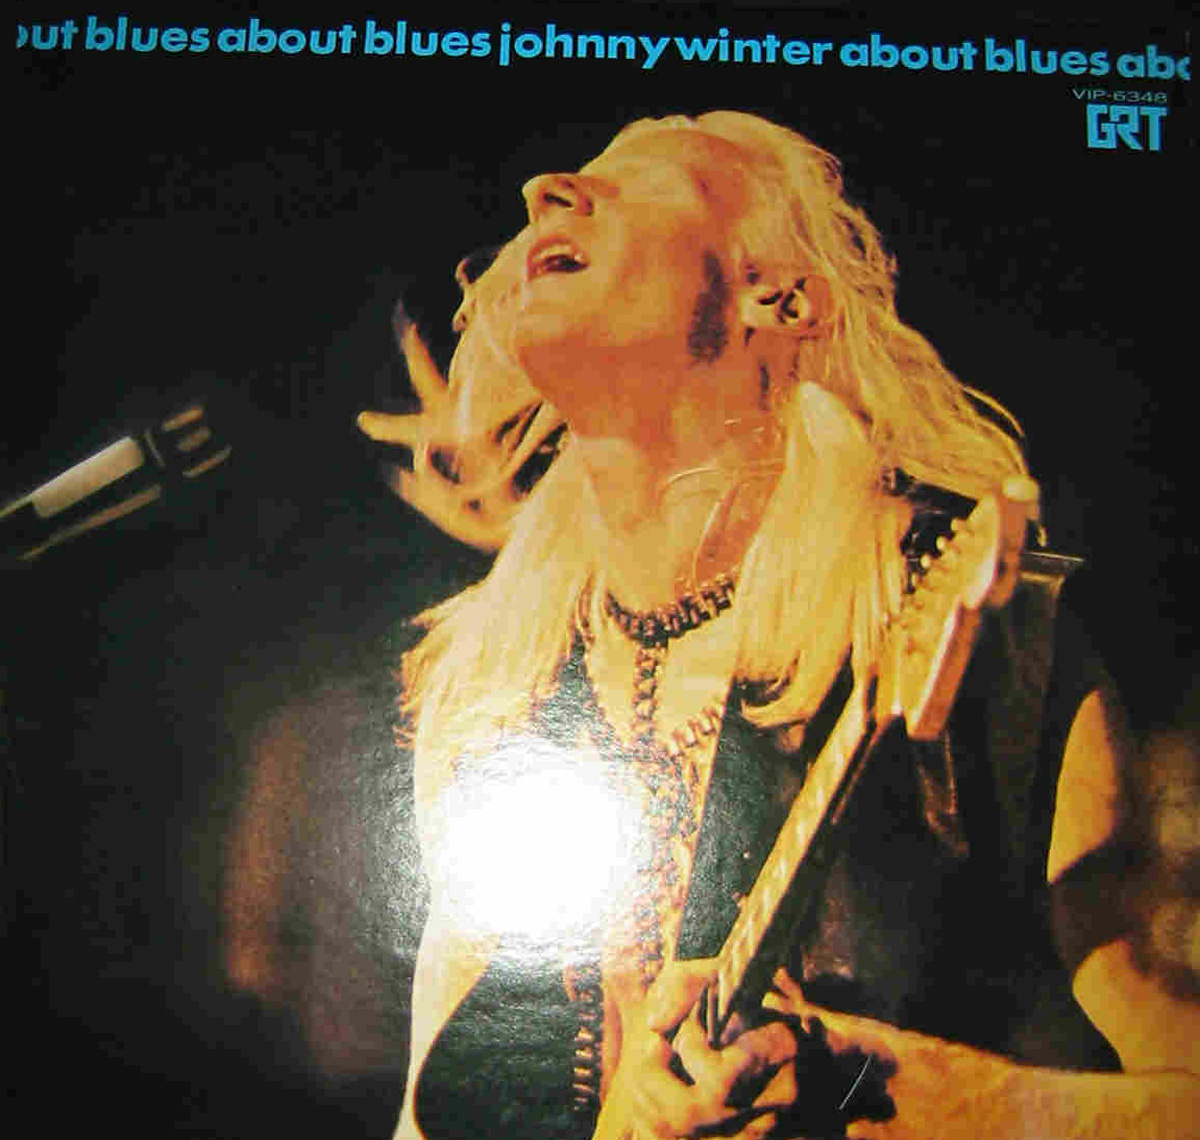 The japanese release of the "About Blues" have the front and album back cover photos reversed.